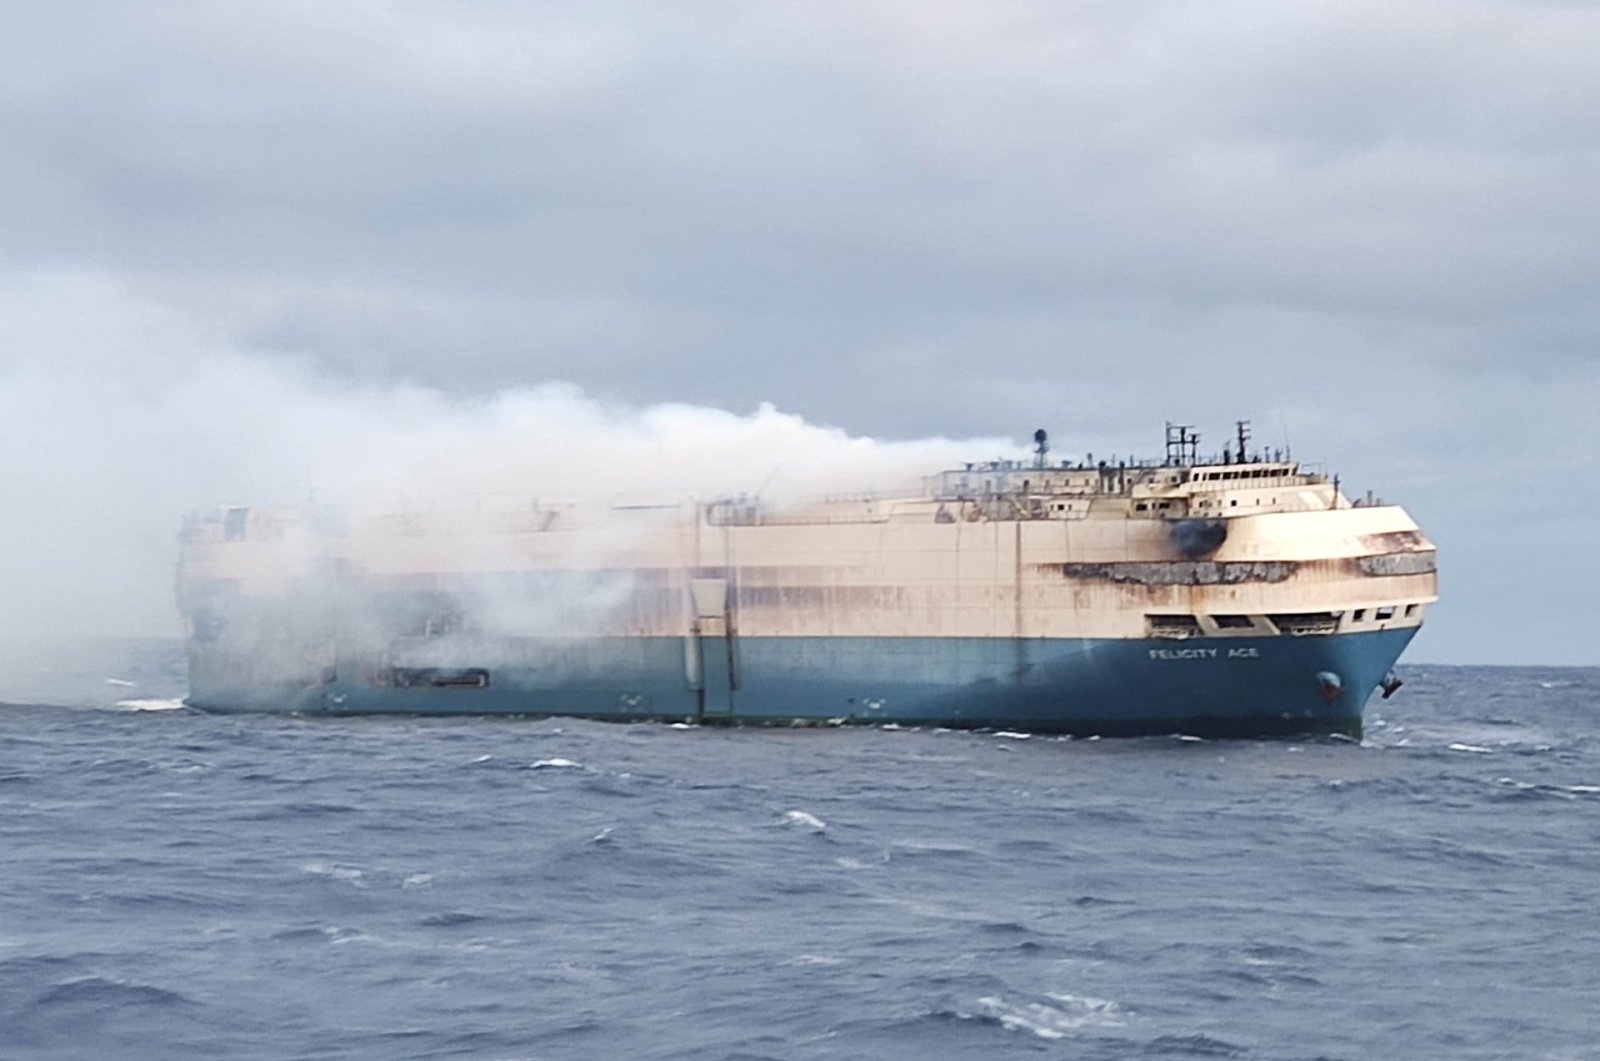 The ship, Felicity Ace, which was traveling from Emden, Germany, where Volkswagen has a factory, to Davisville, in the U.S. state of Rhode Island, burns more than 100 km from the Azores islands, Portugal, Feb. 18, 2022. (Portuguese Navy Handout via Reuters)